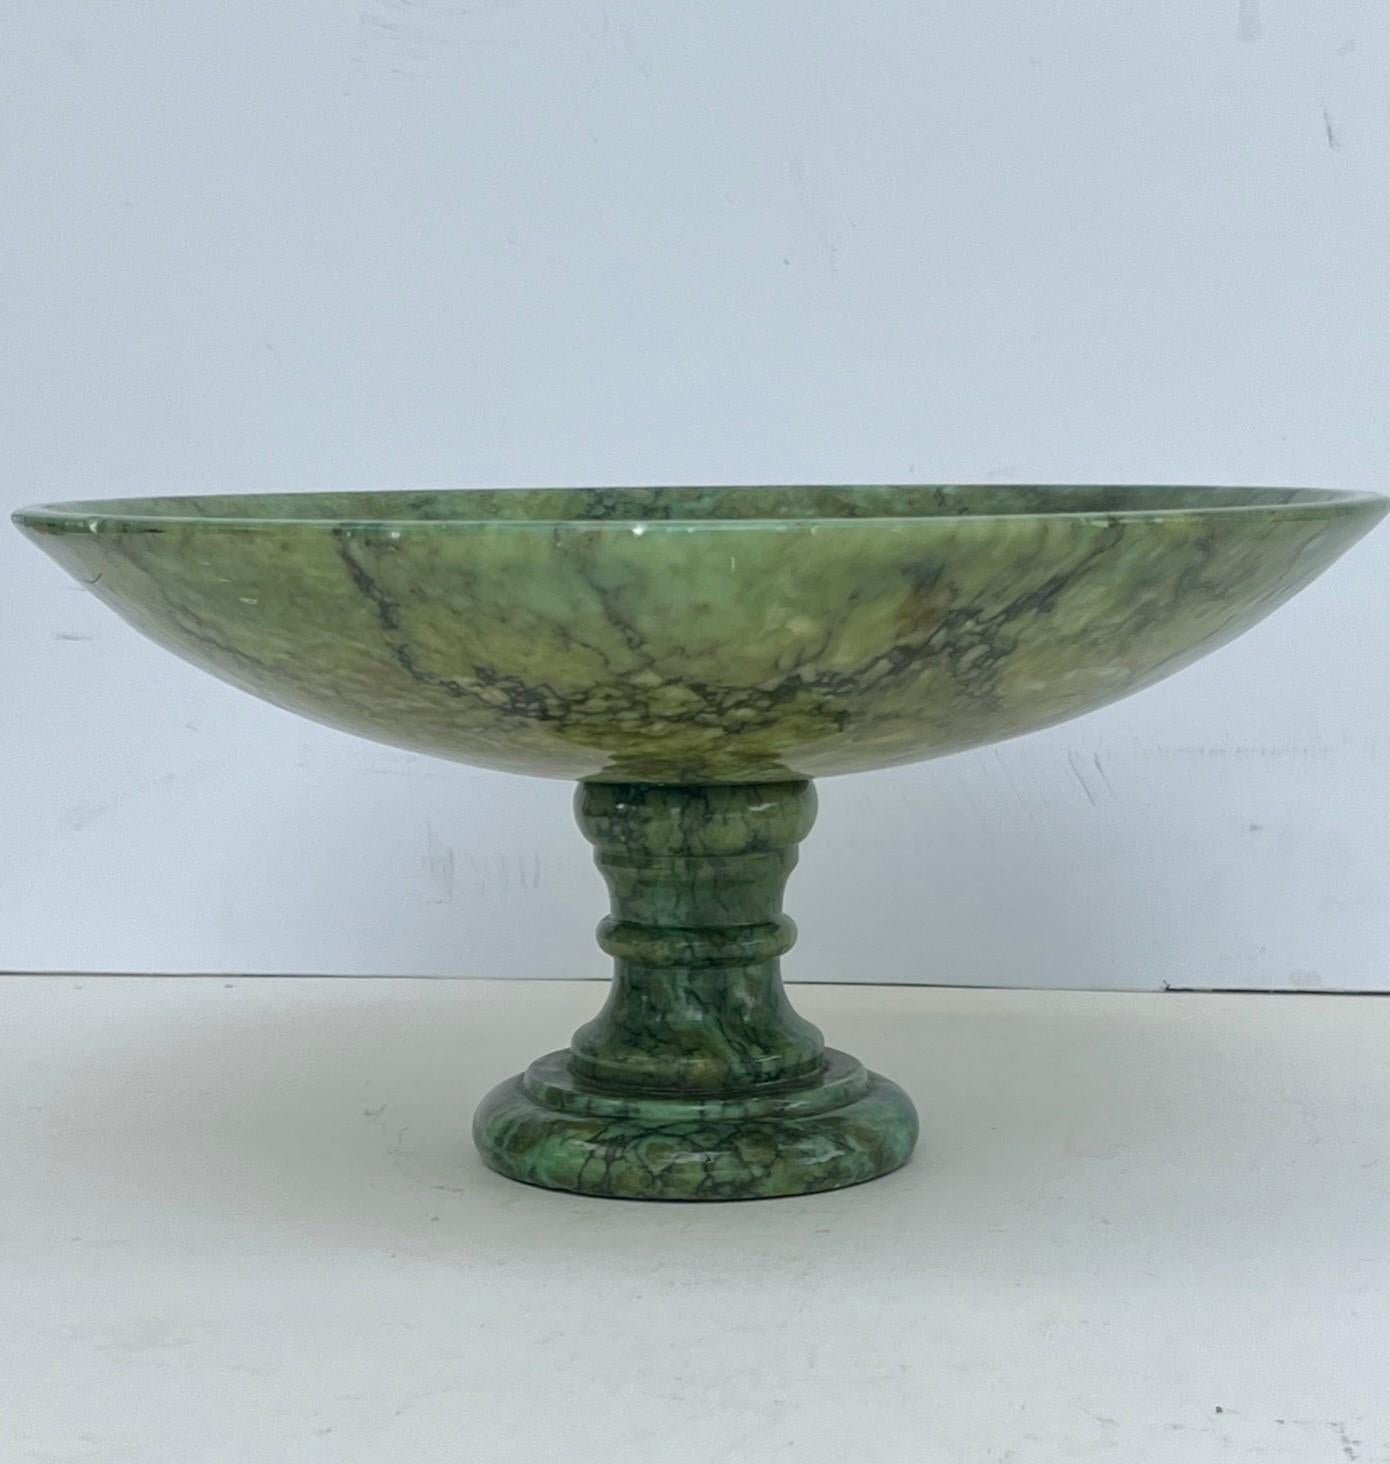 Italian 19th Century Green Marble Pedestal Bowl.

Neoclassical style marble tazza centerpiece from Florence, Italy. The marble bowls were an attractive souvenir for travelers on their Grand Tour. The elegant shape modeled after Antiquity is